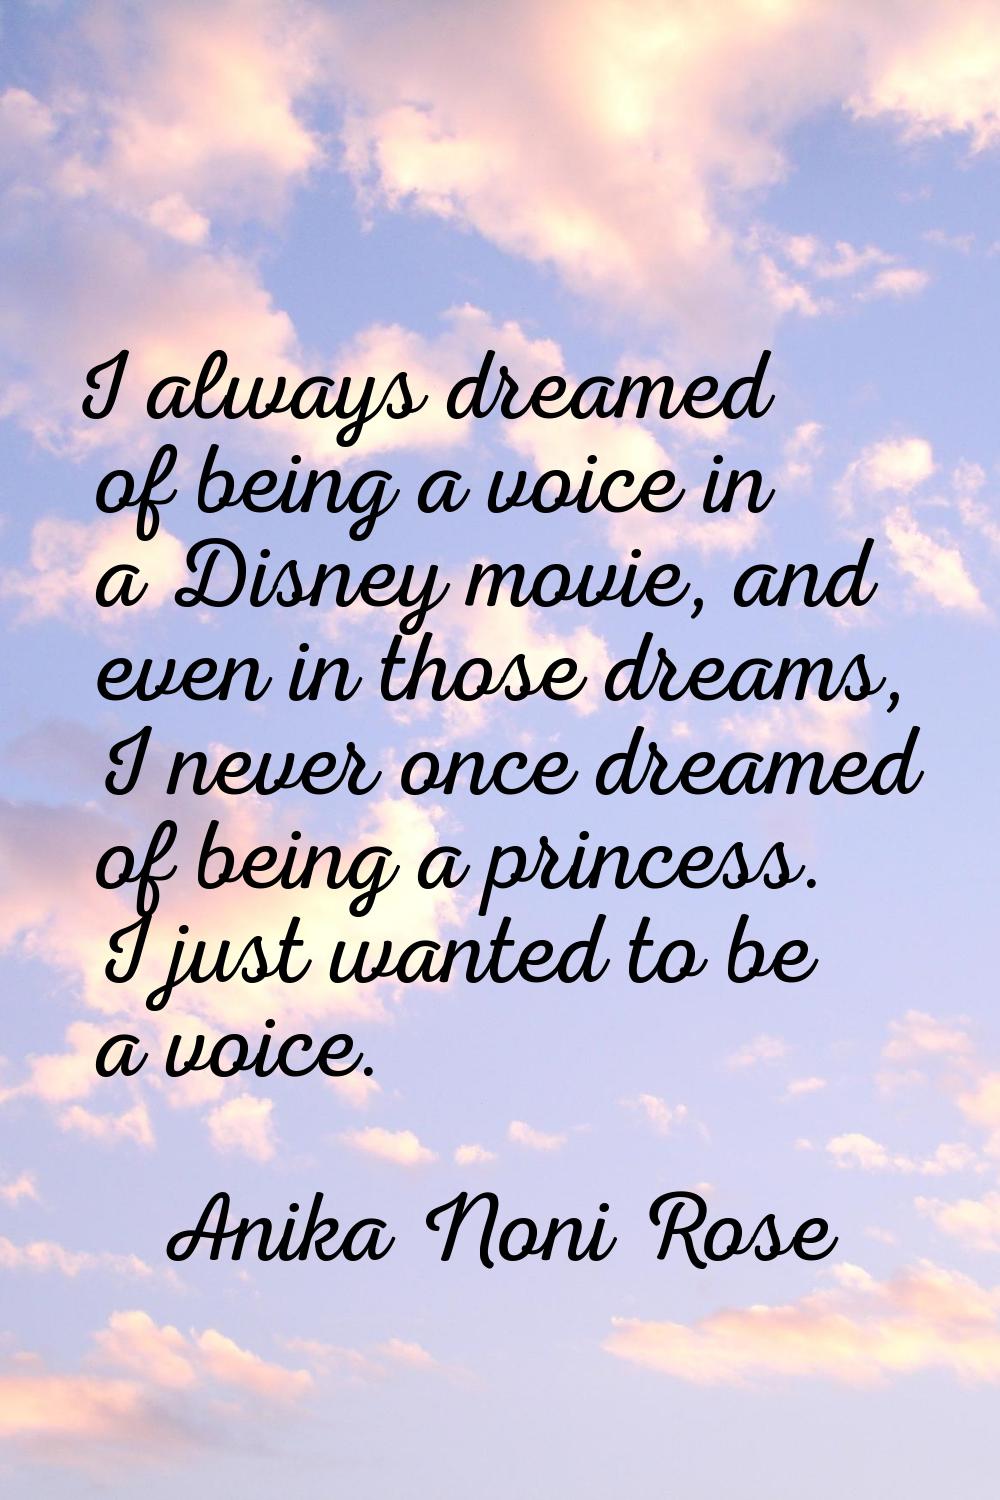 I always dreamed of being a voice in a Disney movie, and even in those dreams, I never once dreamed